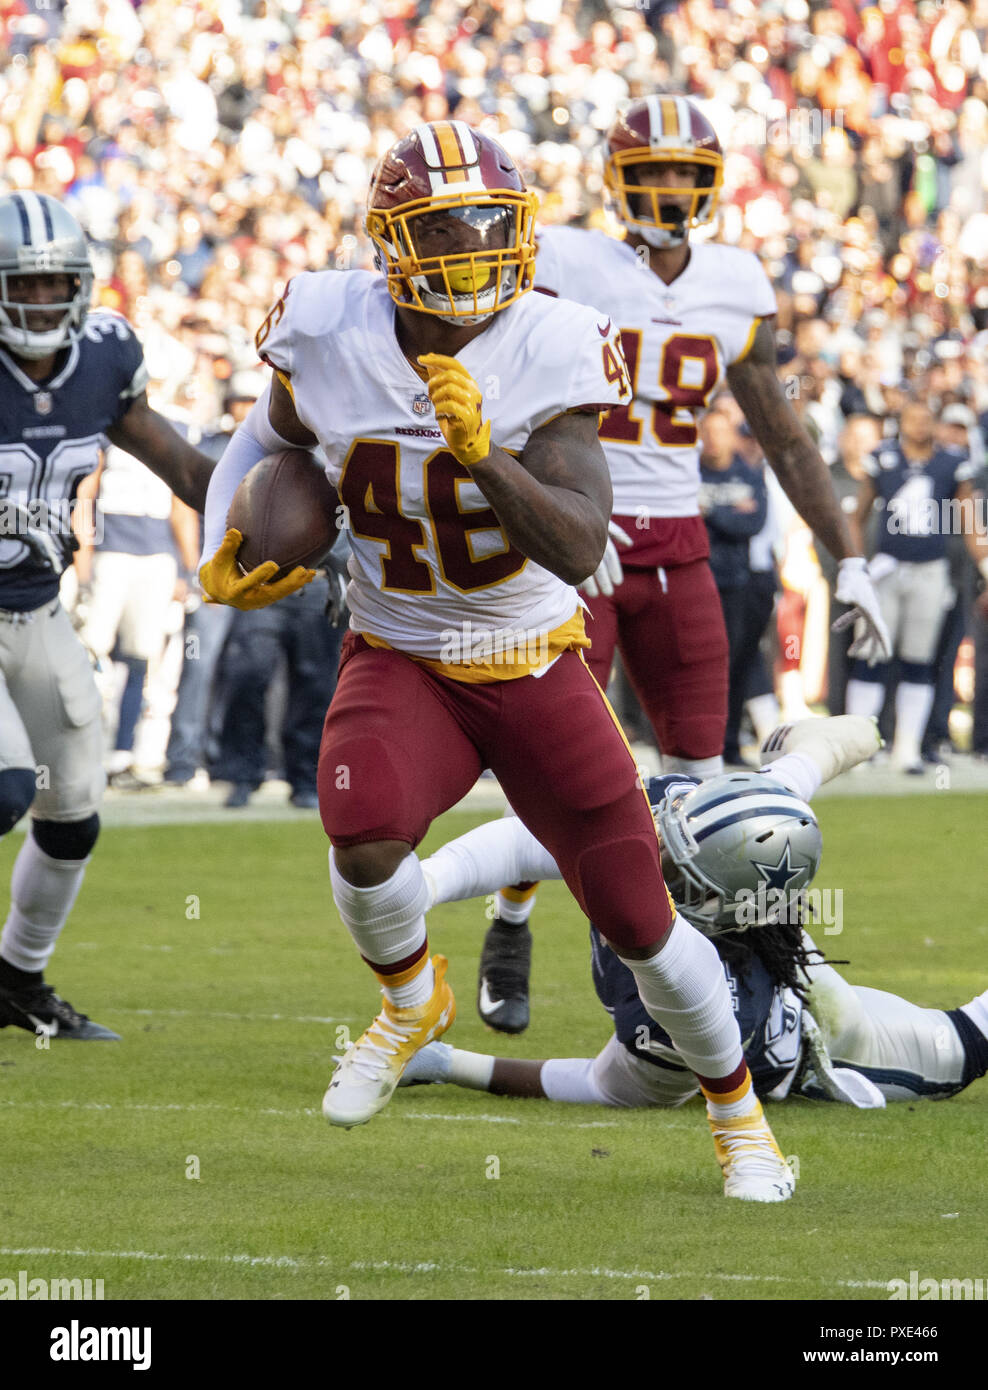 Landover, Maryland, USA. 21st Oct, 2018. Washington Redskins running back Kapri Bibbs (46) breaks into the clear as he runs for a first quarter touchdown against the Dallas Cowboys at FedEx Field in Landover, Maryland on Sunday, October 21, 2018 Credit: Ron Sachs/CNP/ZUMA Wire/Alamy Live News Stock Photo